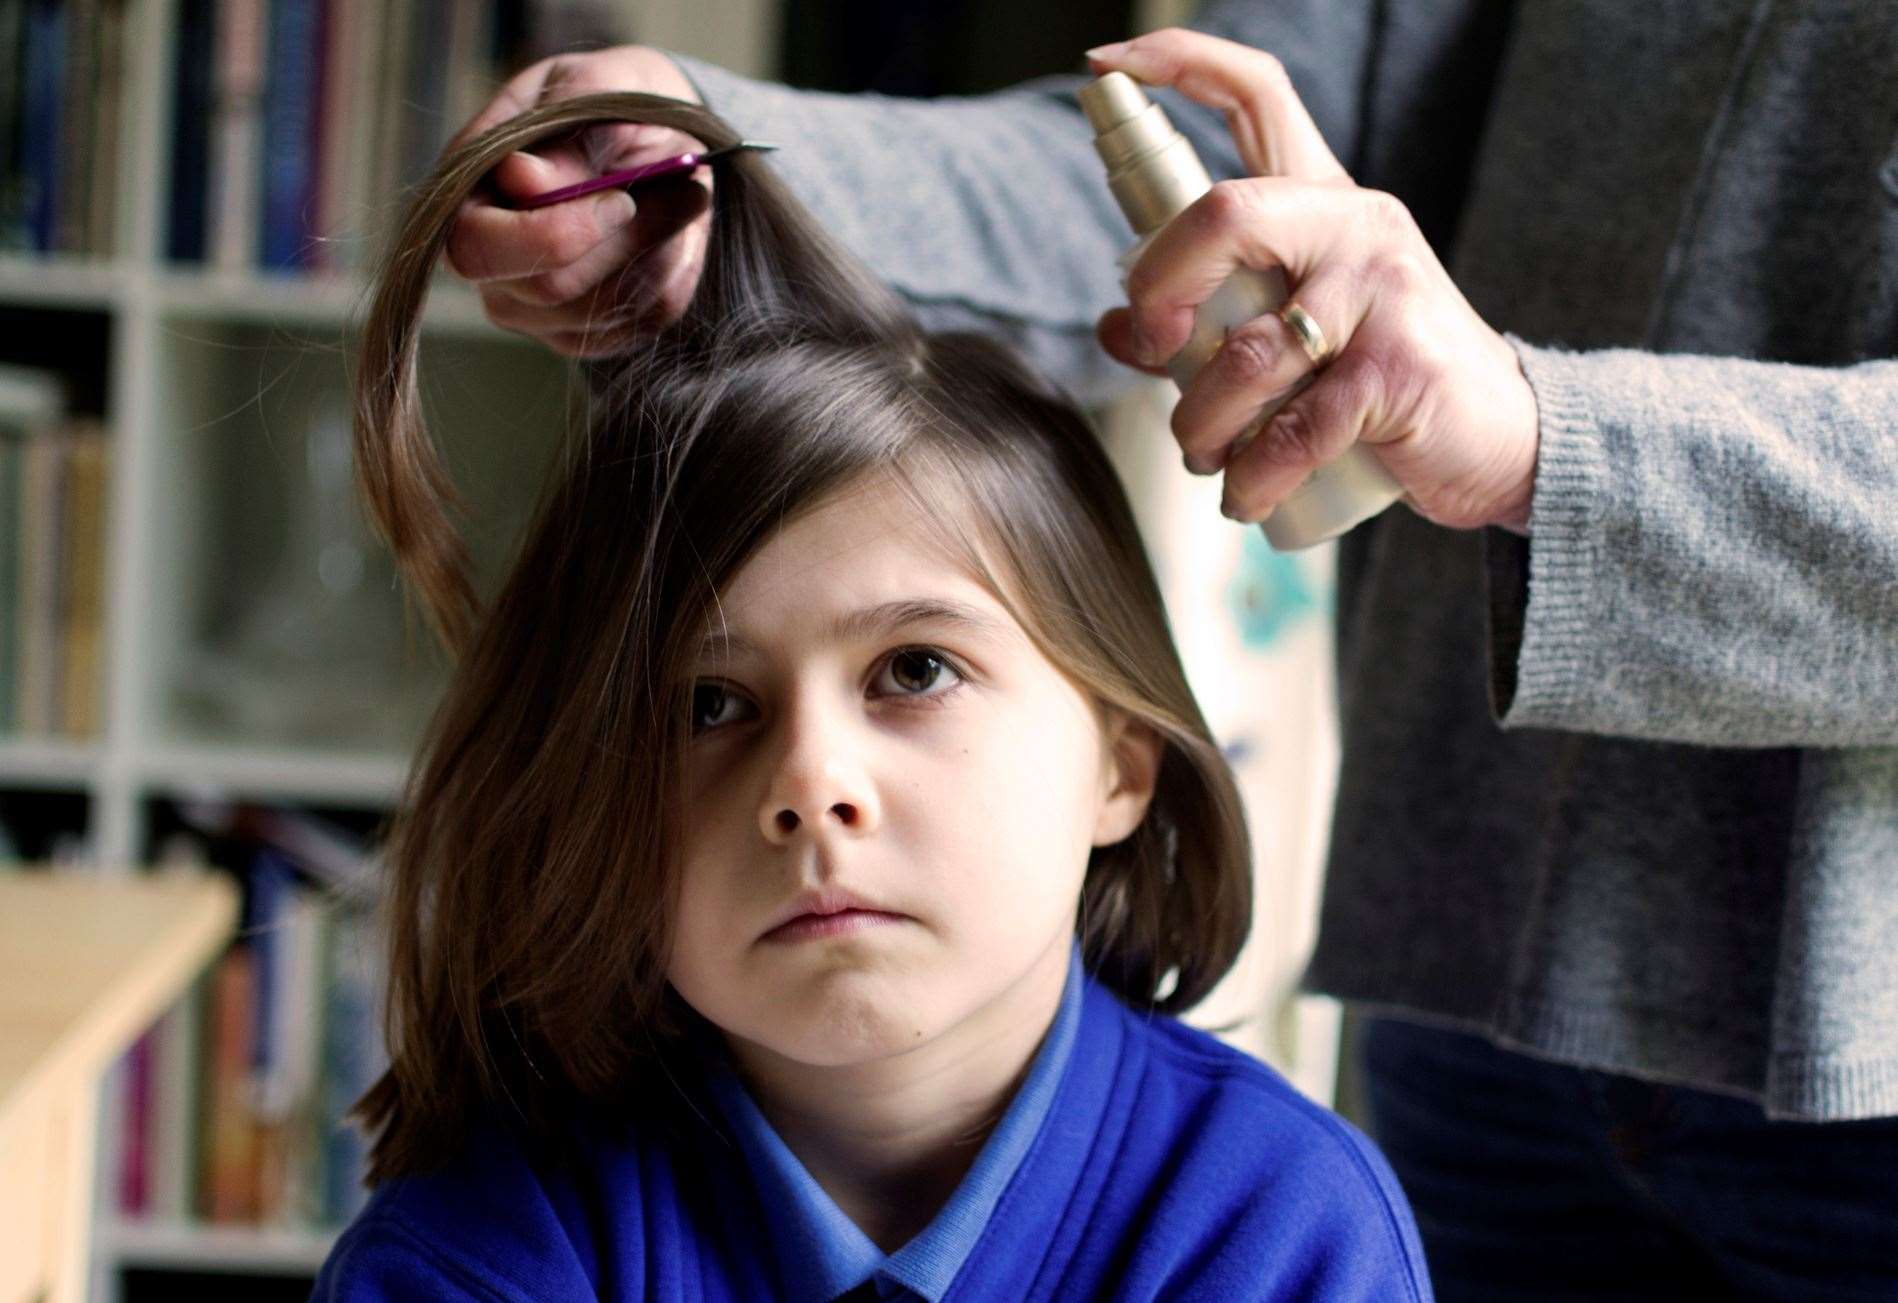 The NHS advises families with head lice to comb regularly with conditioner and a fine-toothed comb. Image: iStock.